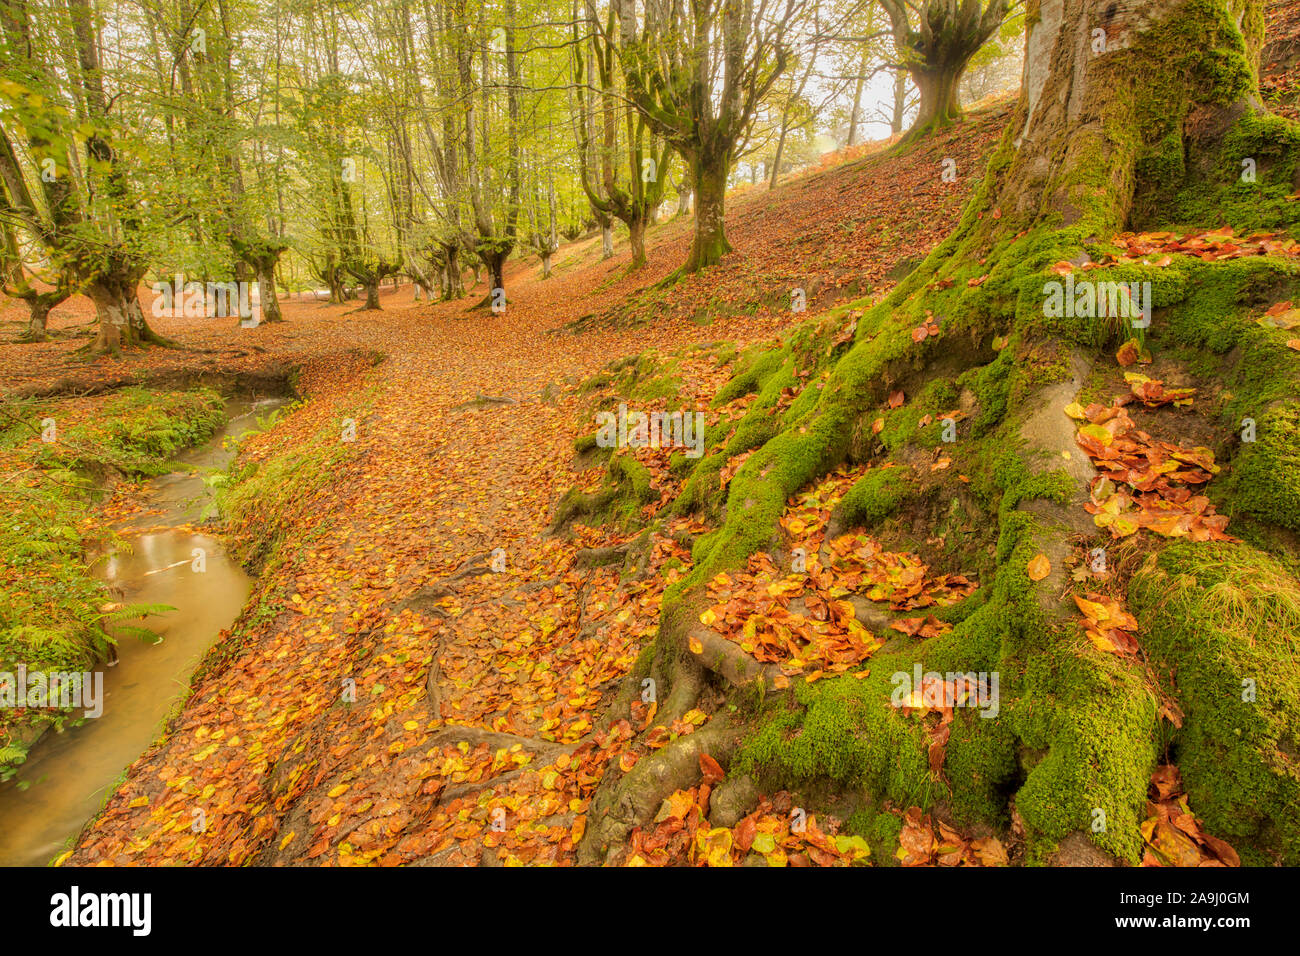 Beechwood trees in fall,  Otzaretta Forest, Gorbea Natural Park, Spain, Basque Country forest park, Often called obne of the World's most beuatiful fo Stock Photo